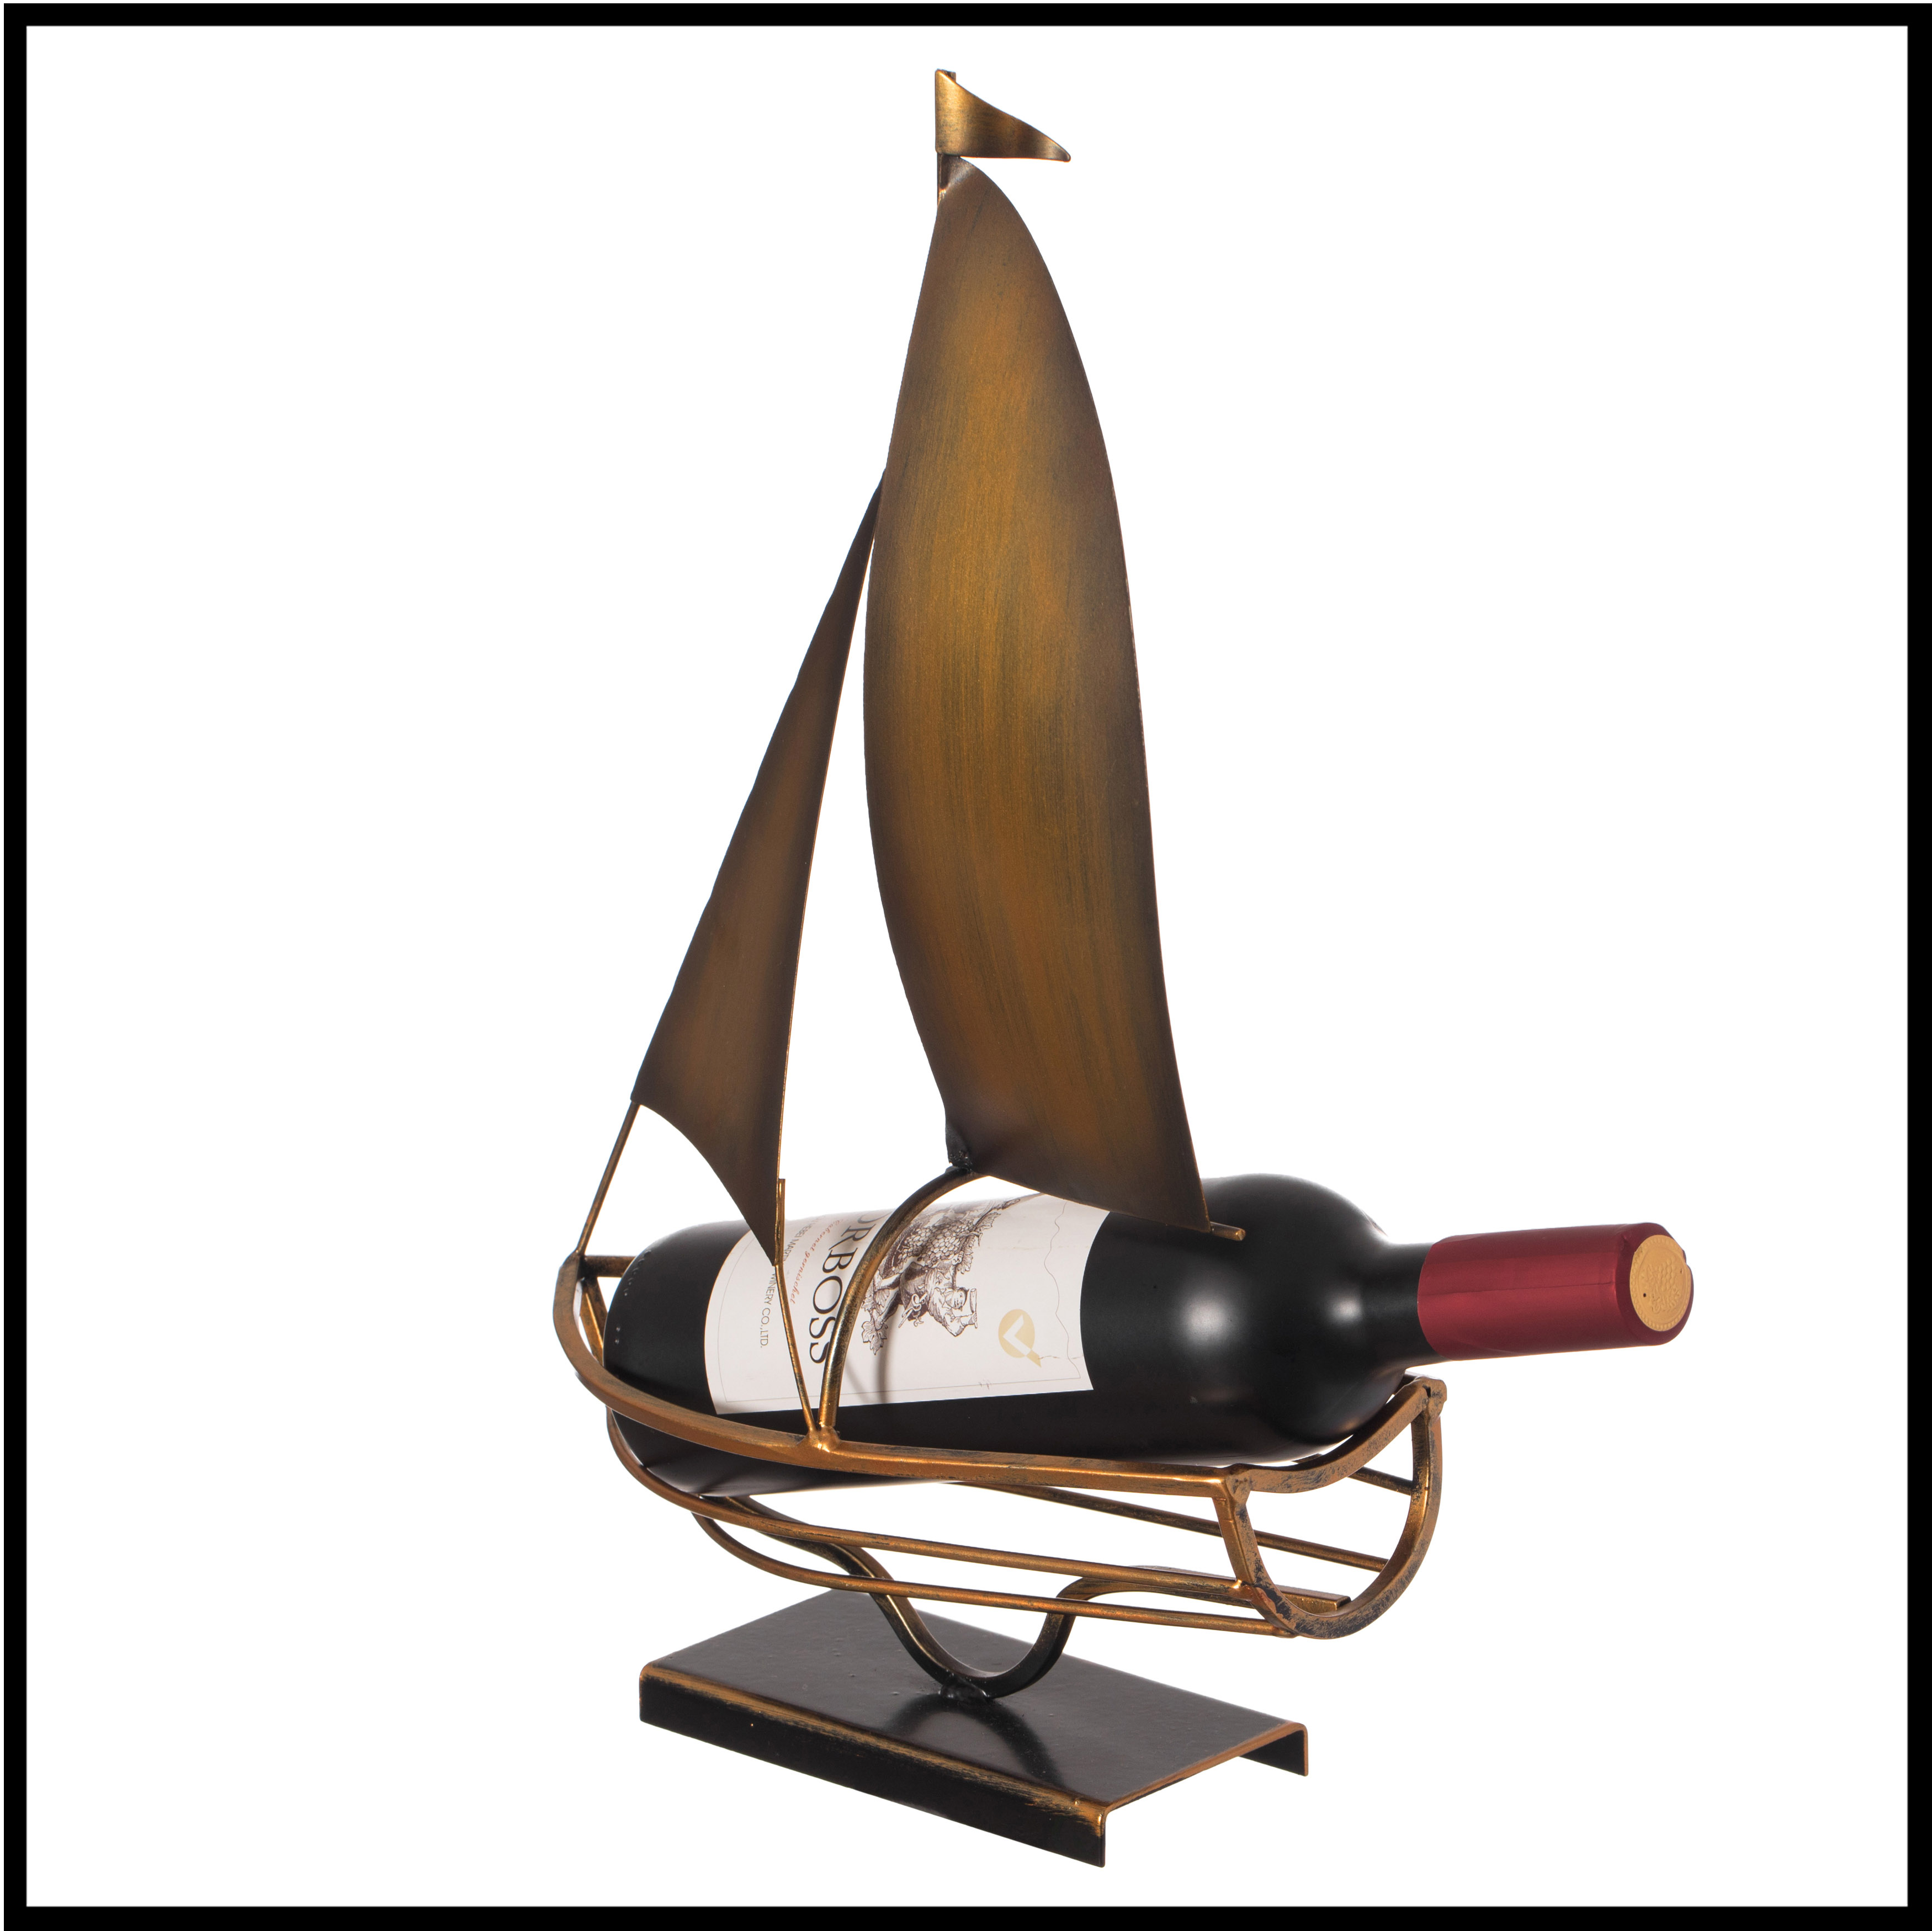 Decorative Bronze Metal Vintage Single Bottle Abstract Boat Wine Holder for Tabletop or Countertop